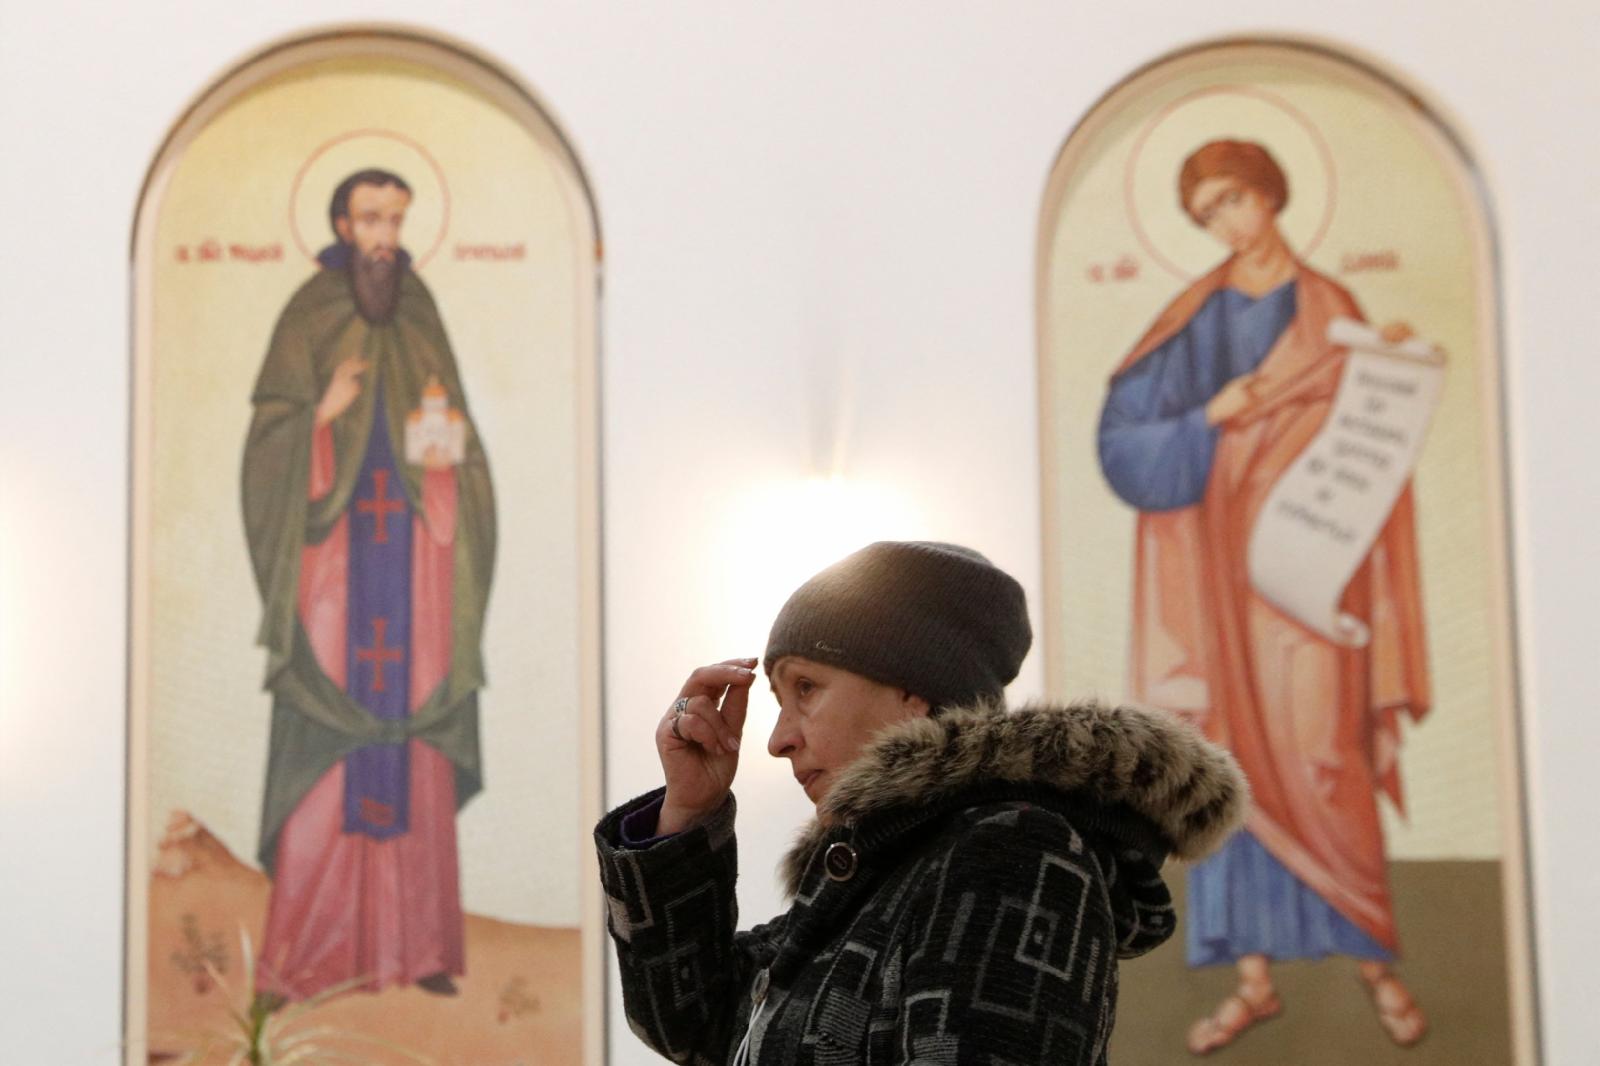 Church leaders appeal for peace in Ukraine